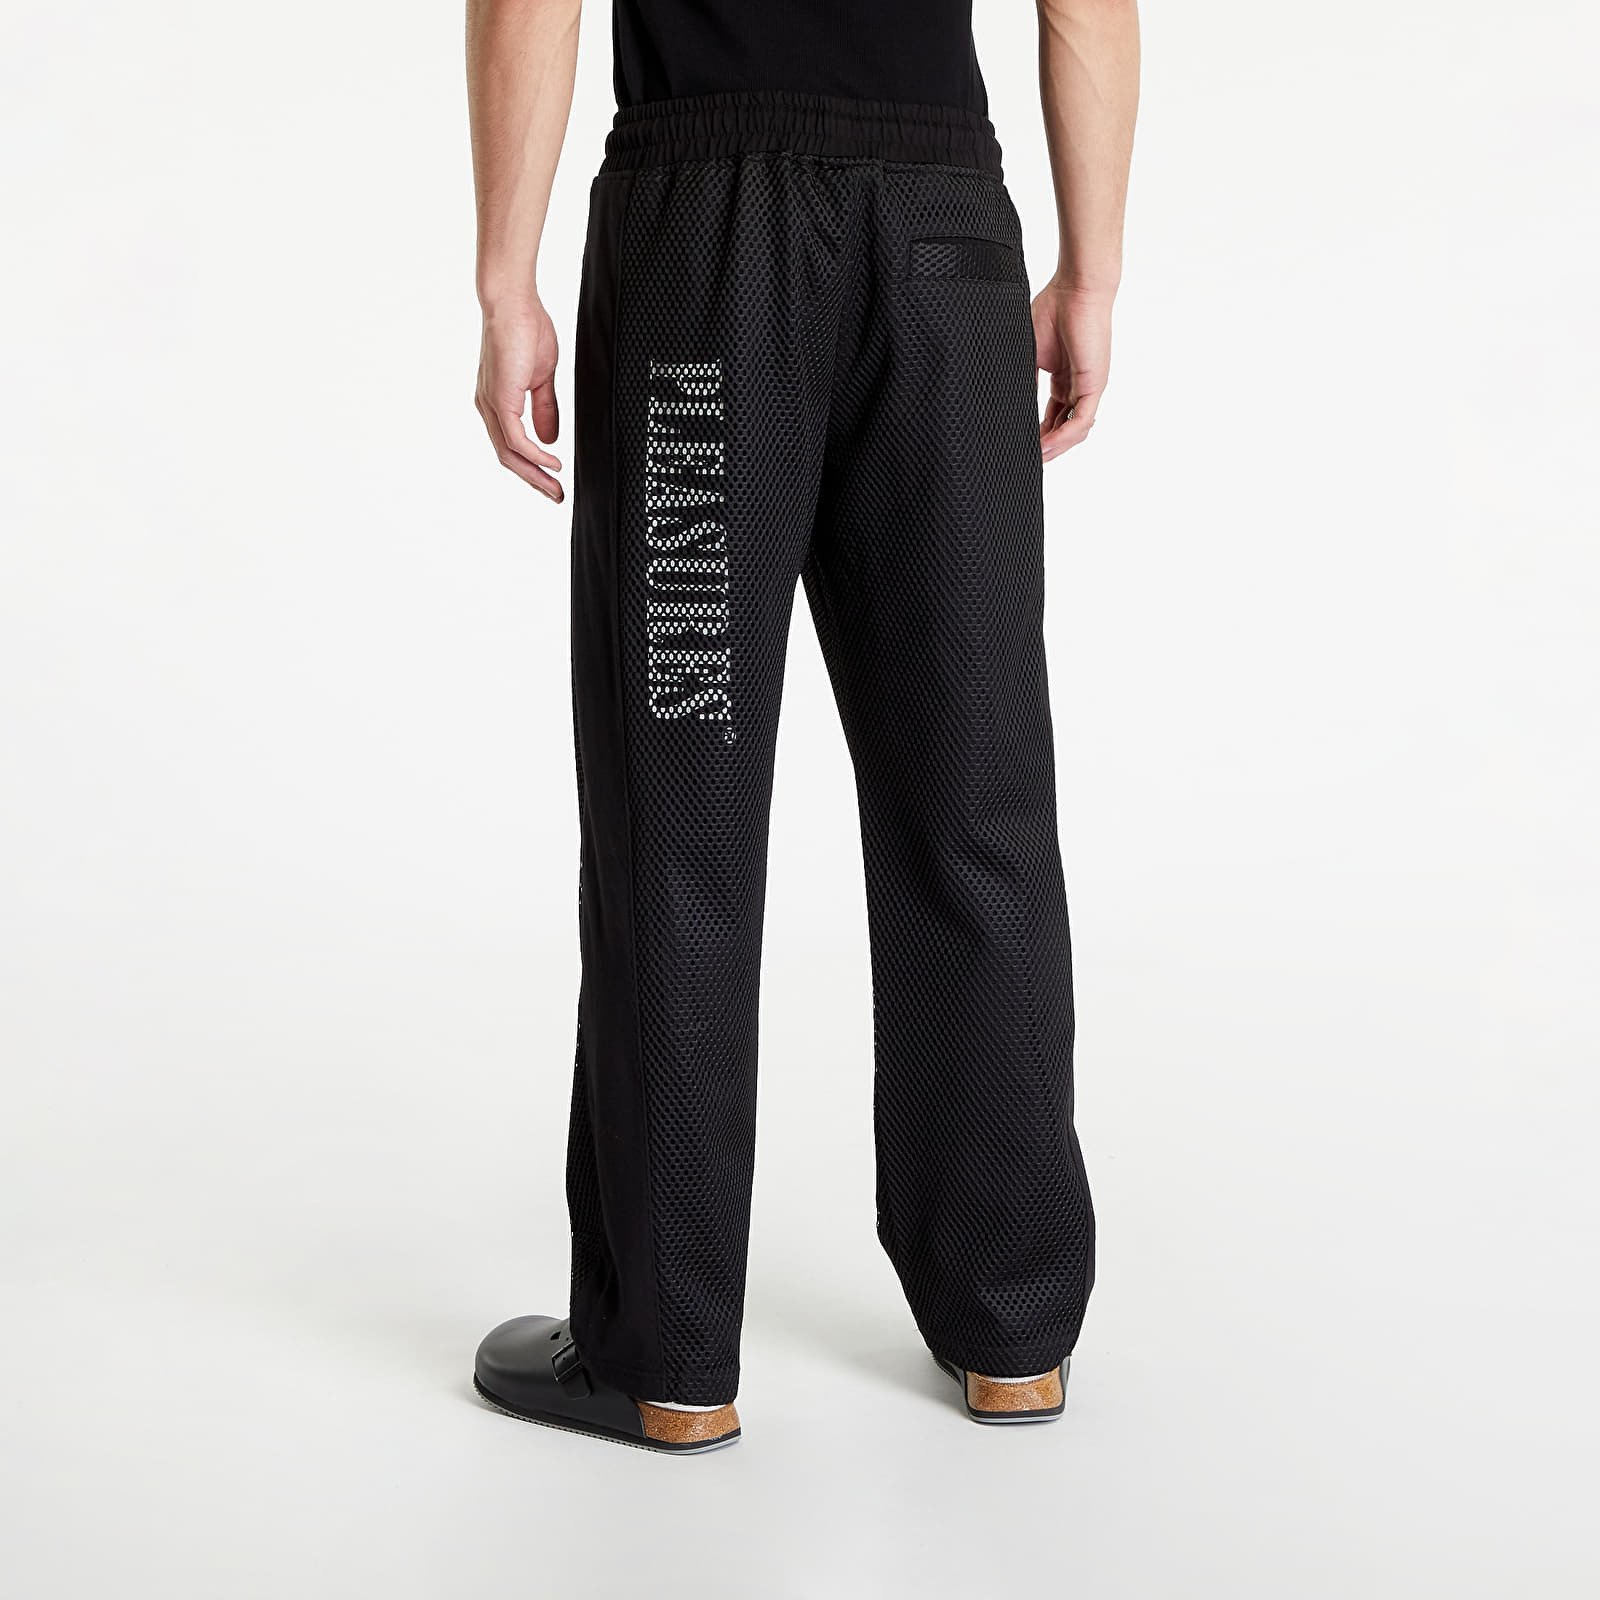 Chicago Track Pant